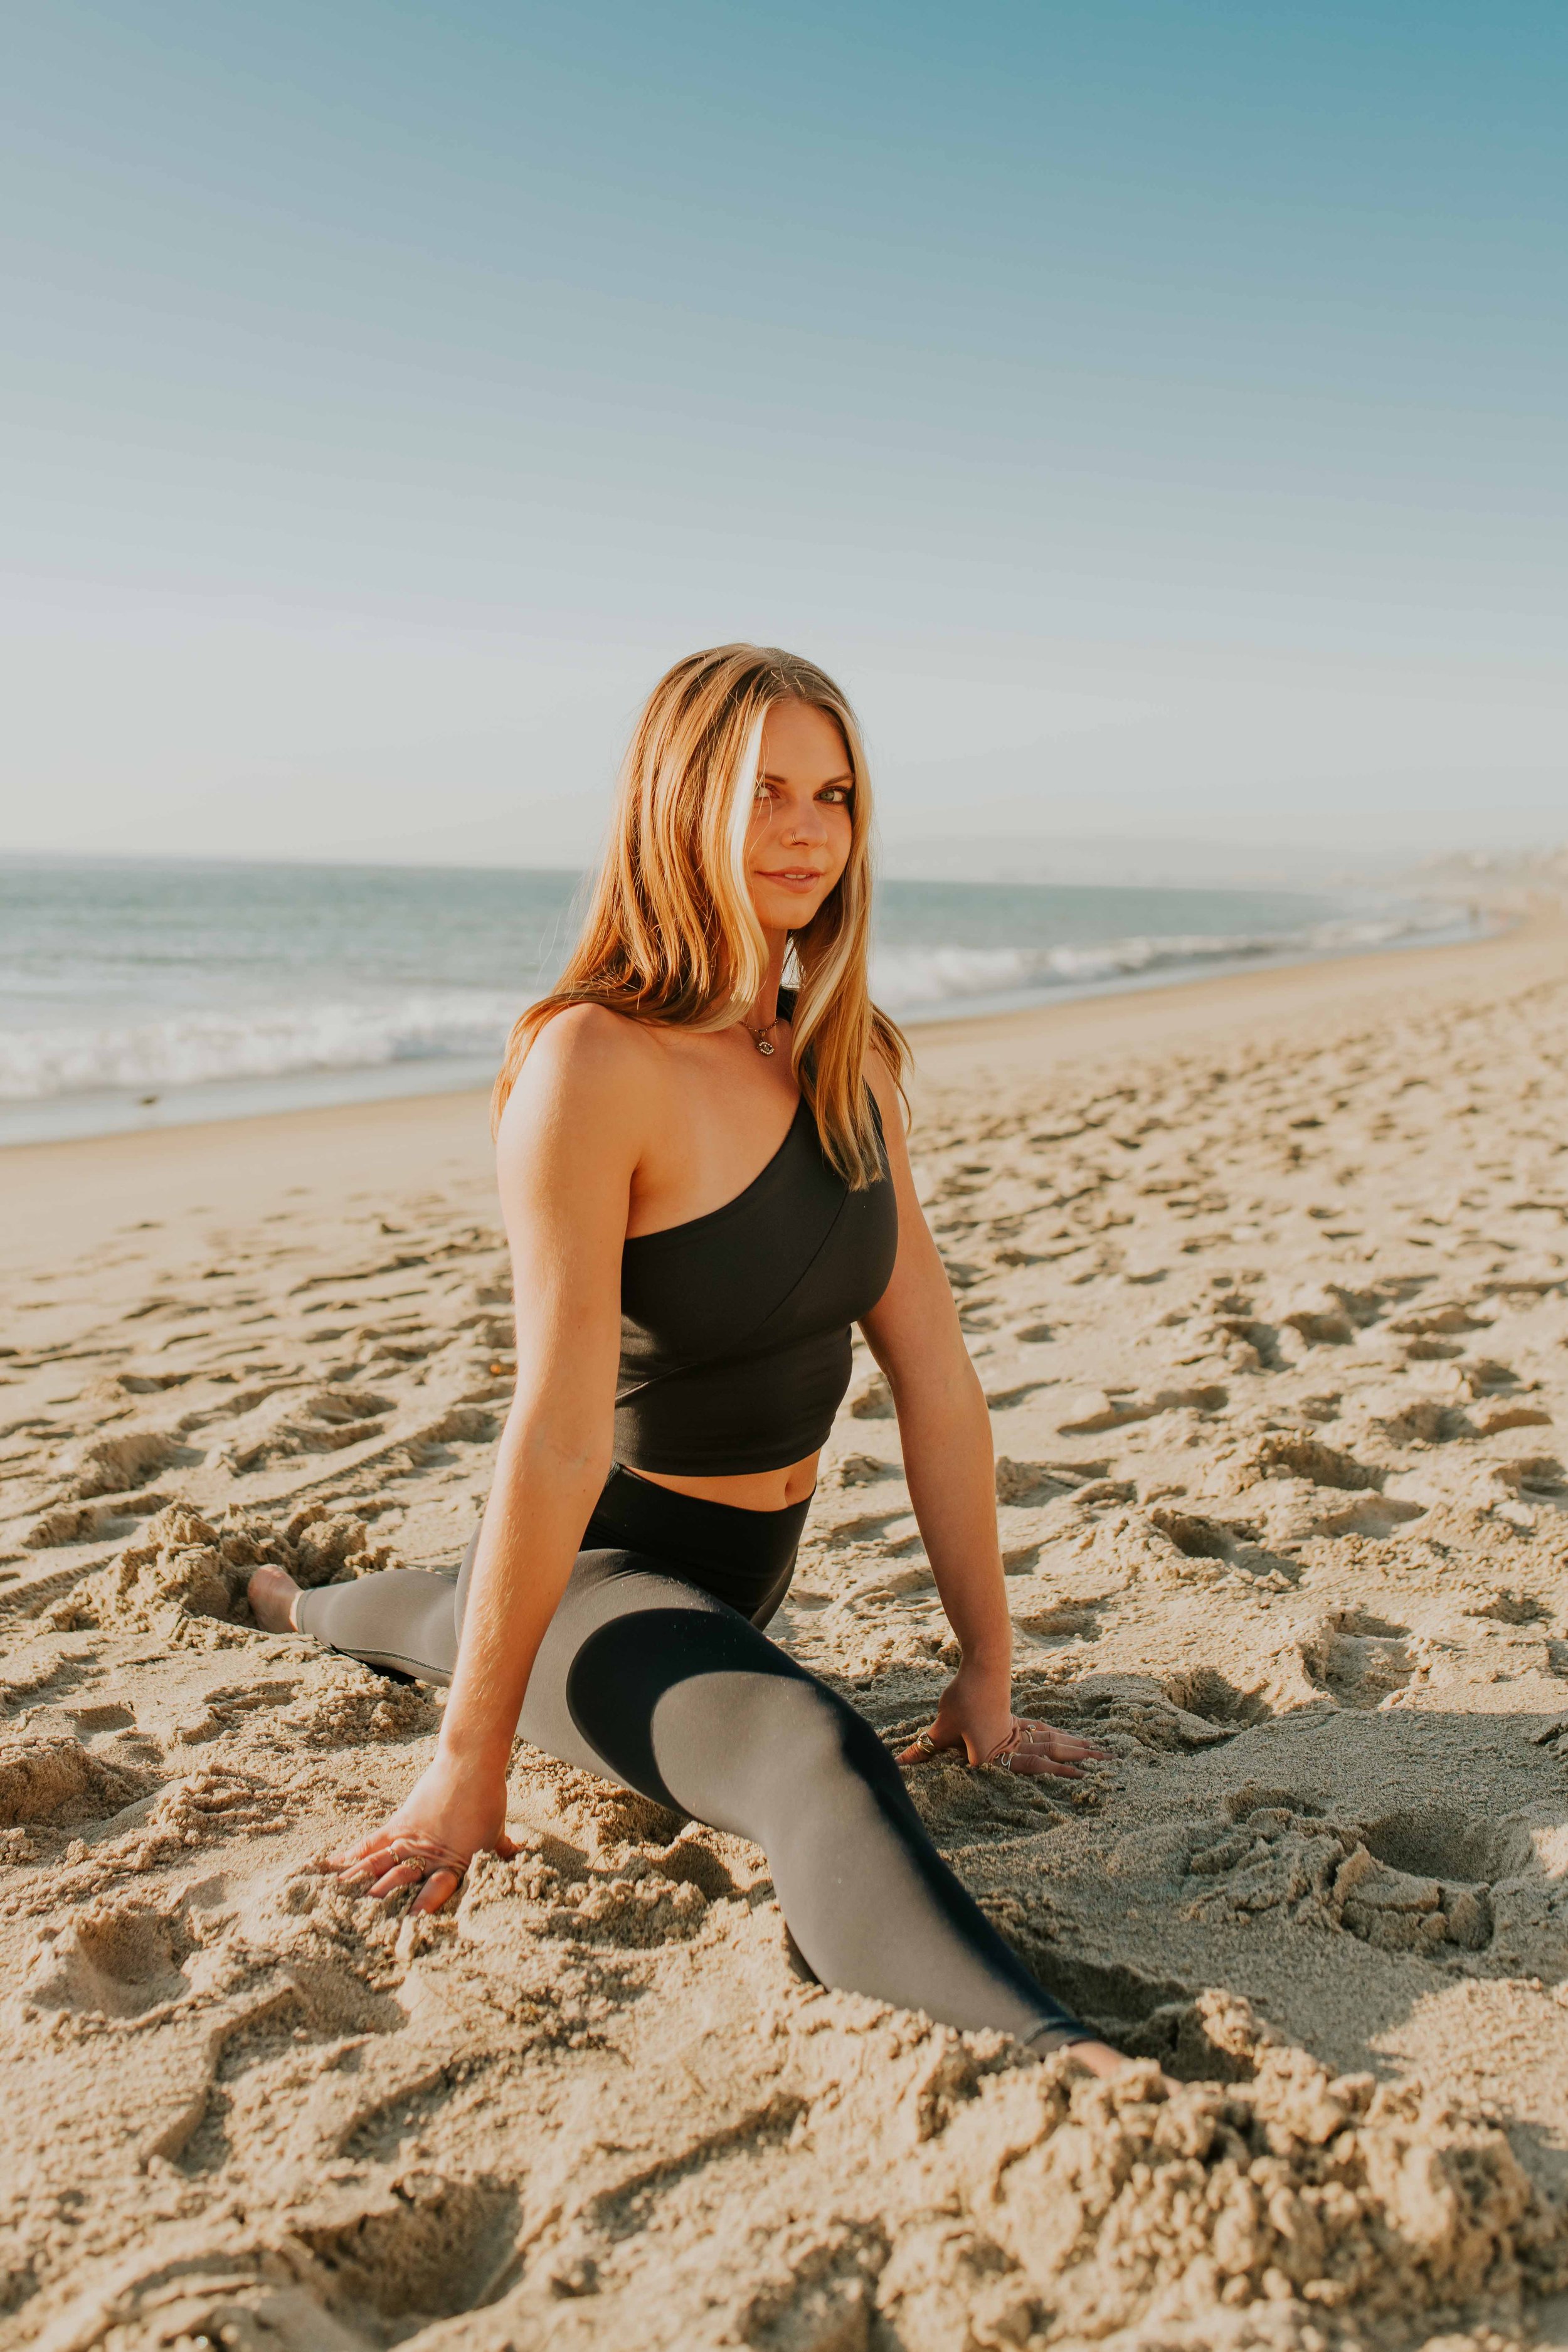  Young women practice yoga poses on San Clemente State Beach for a photoshoot 